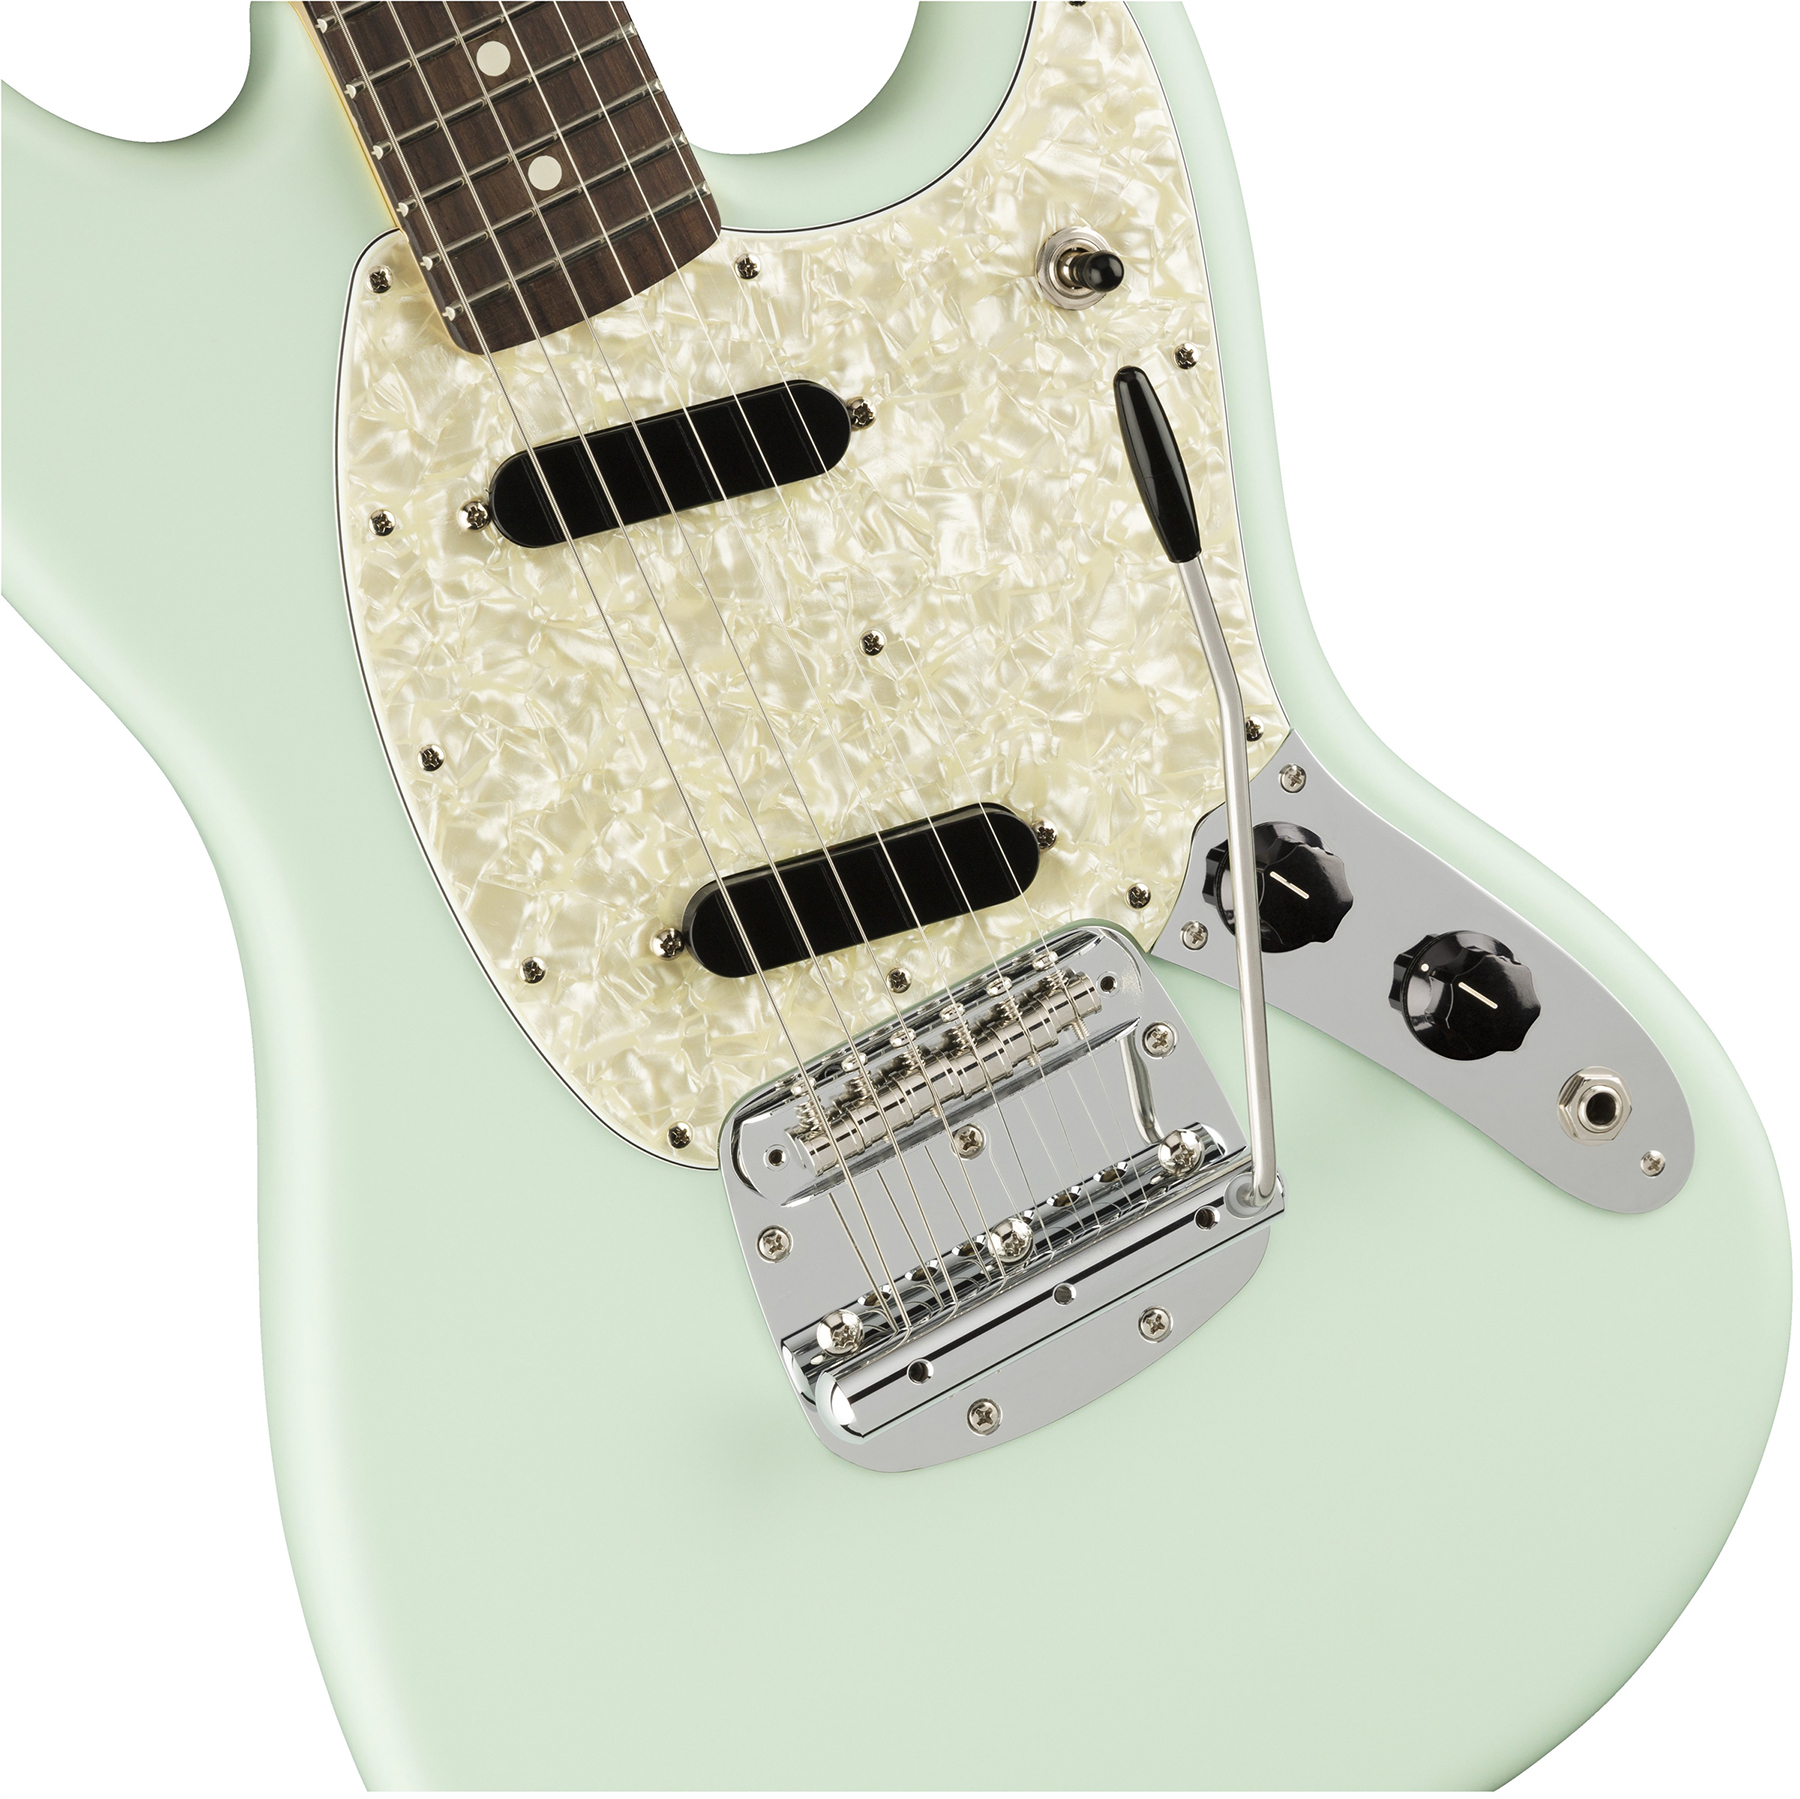 Fender Mustang American Performer Usa Ss Rw - Satin Sonic Blue - Guitare Électrique Double Cut - Variation 2